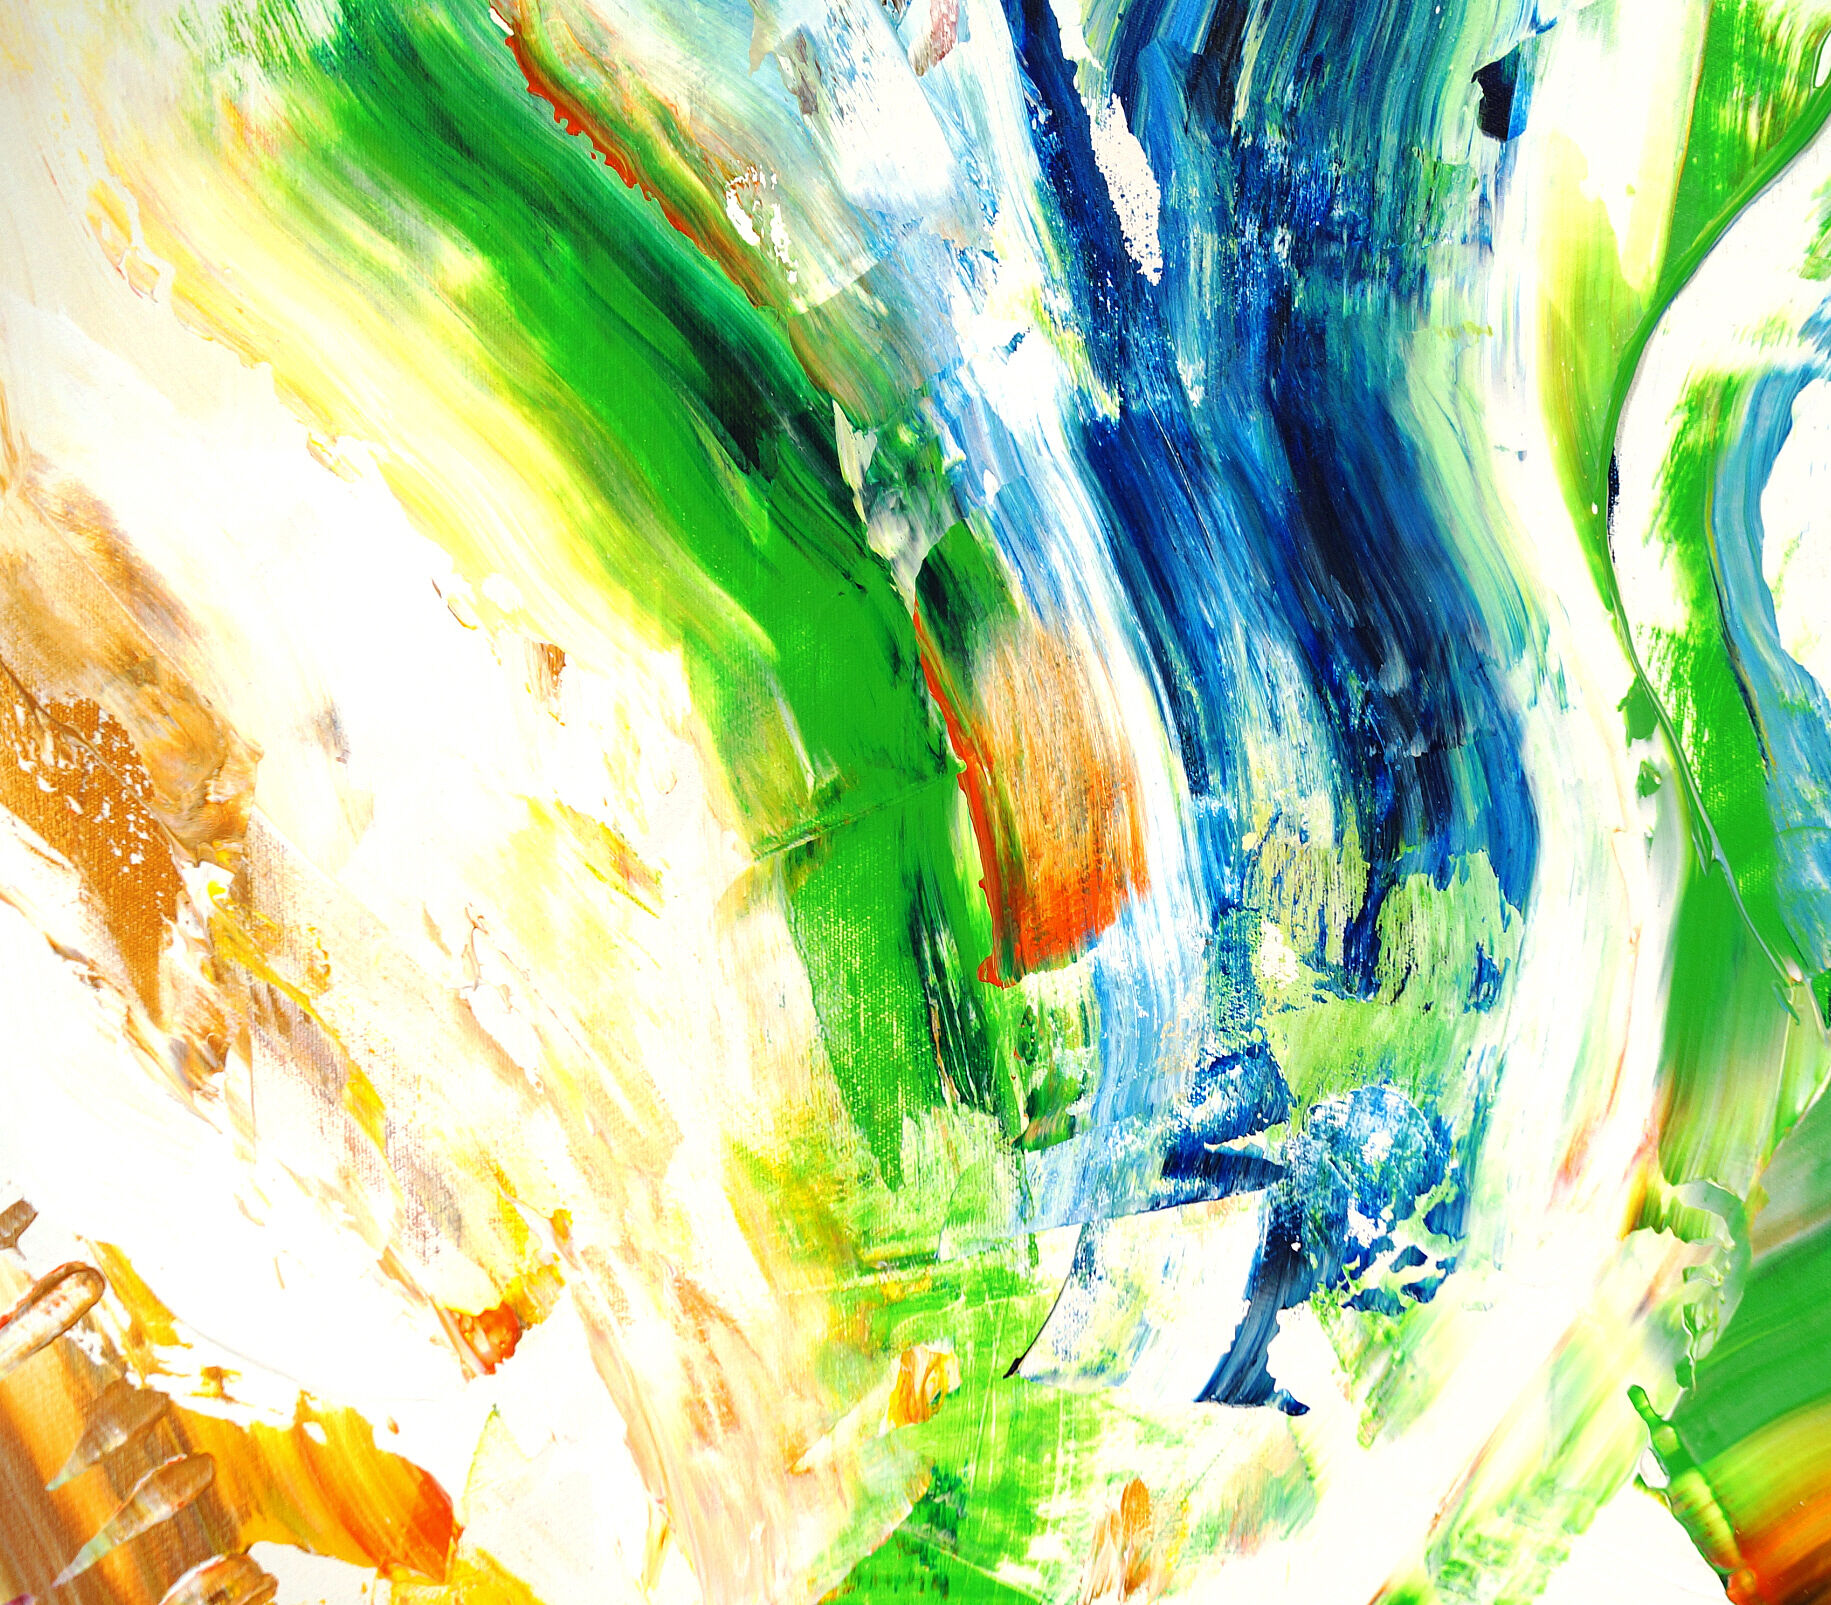 Picture "Vibrant Abstraction XL 1" (2020)